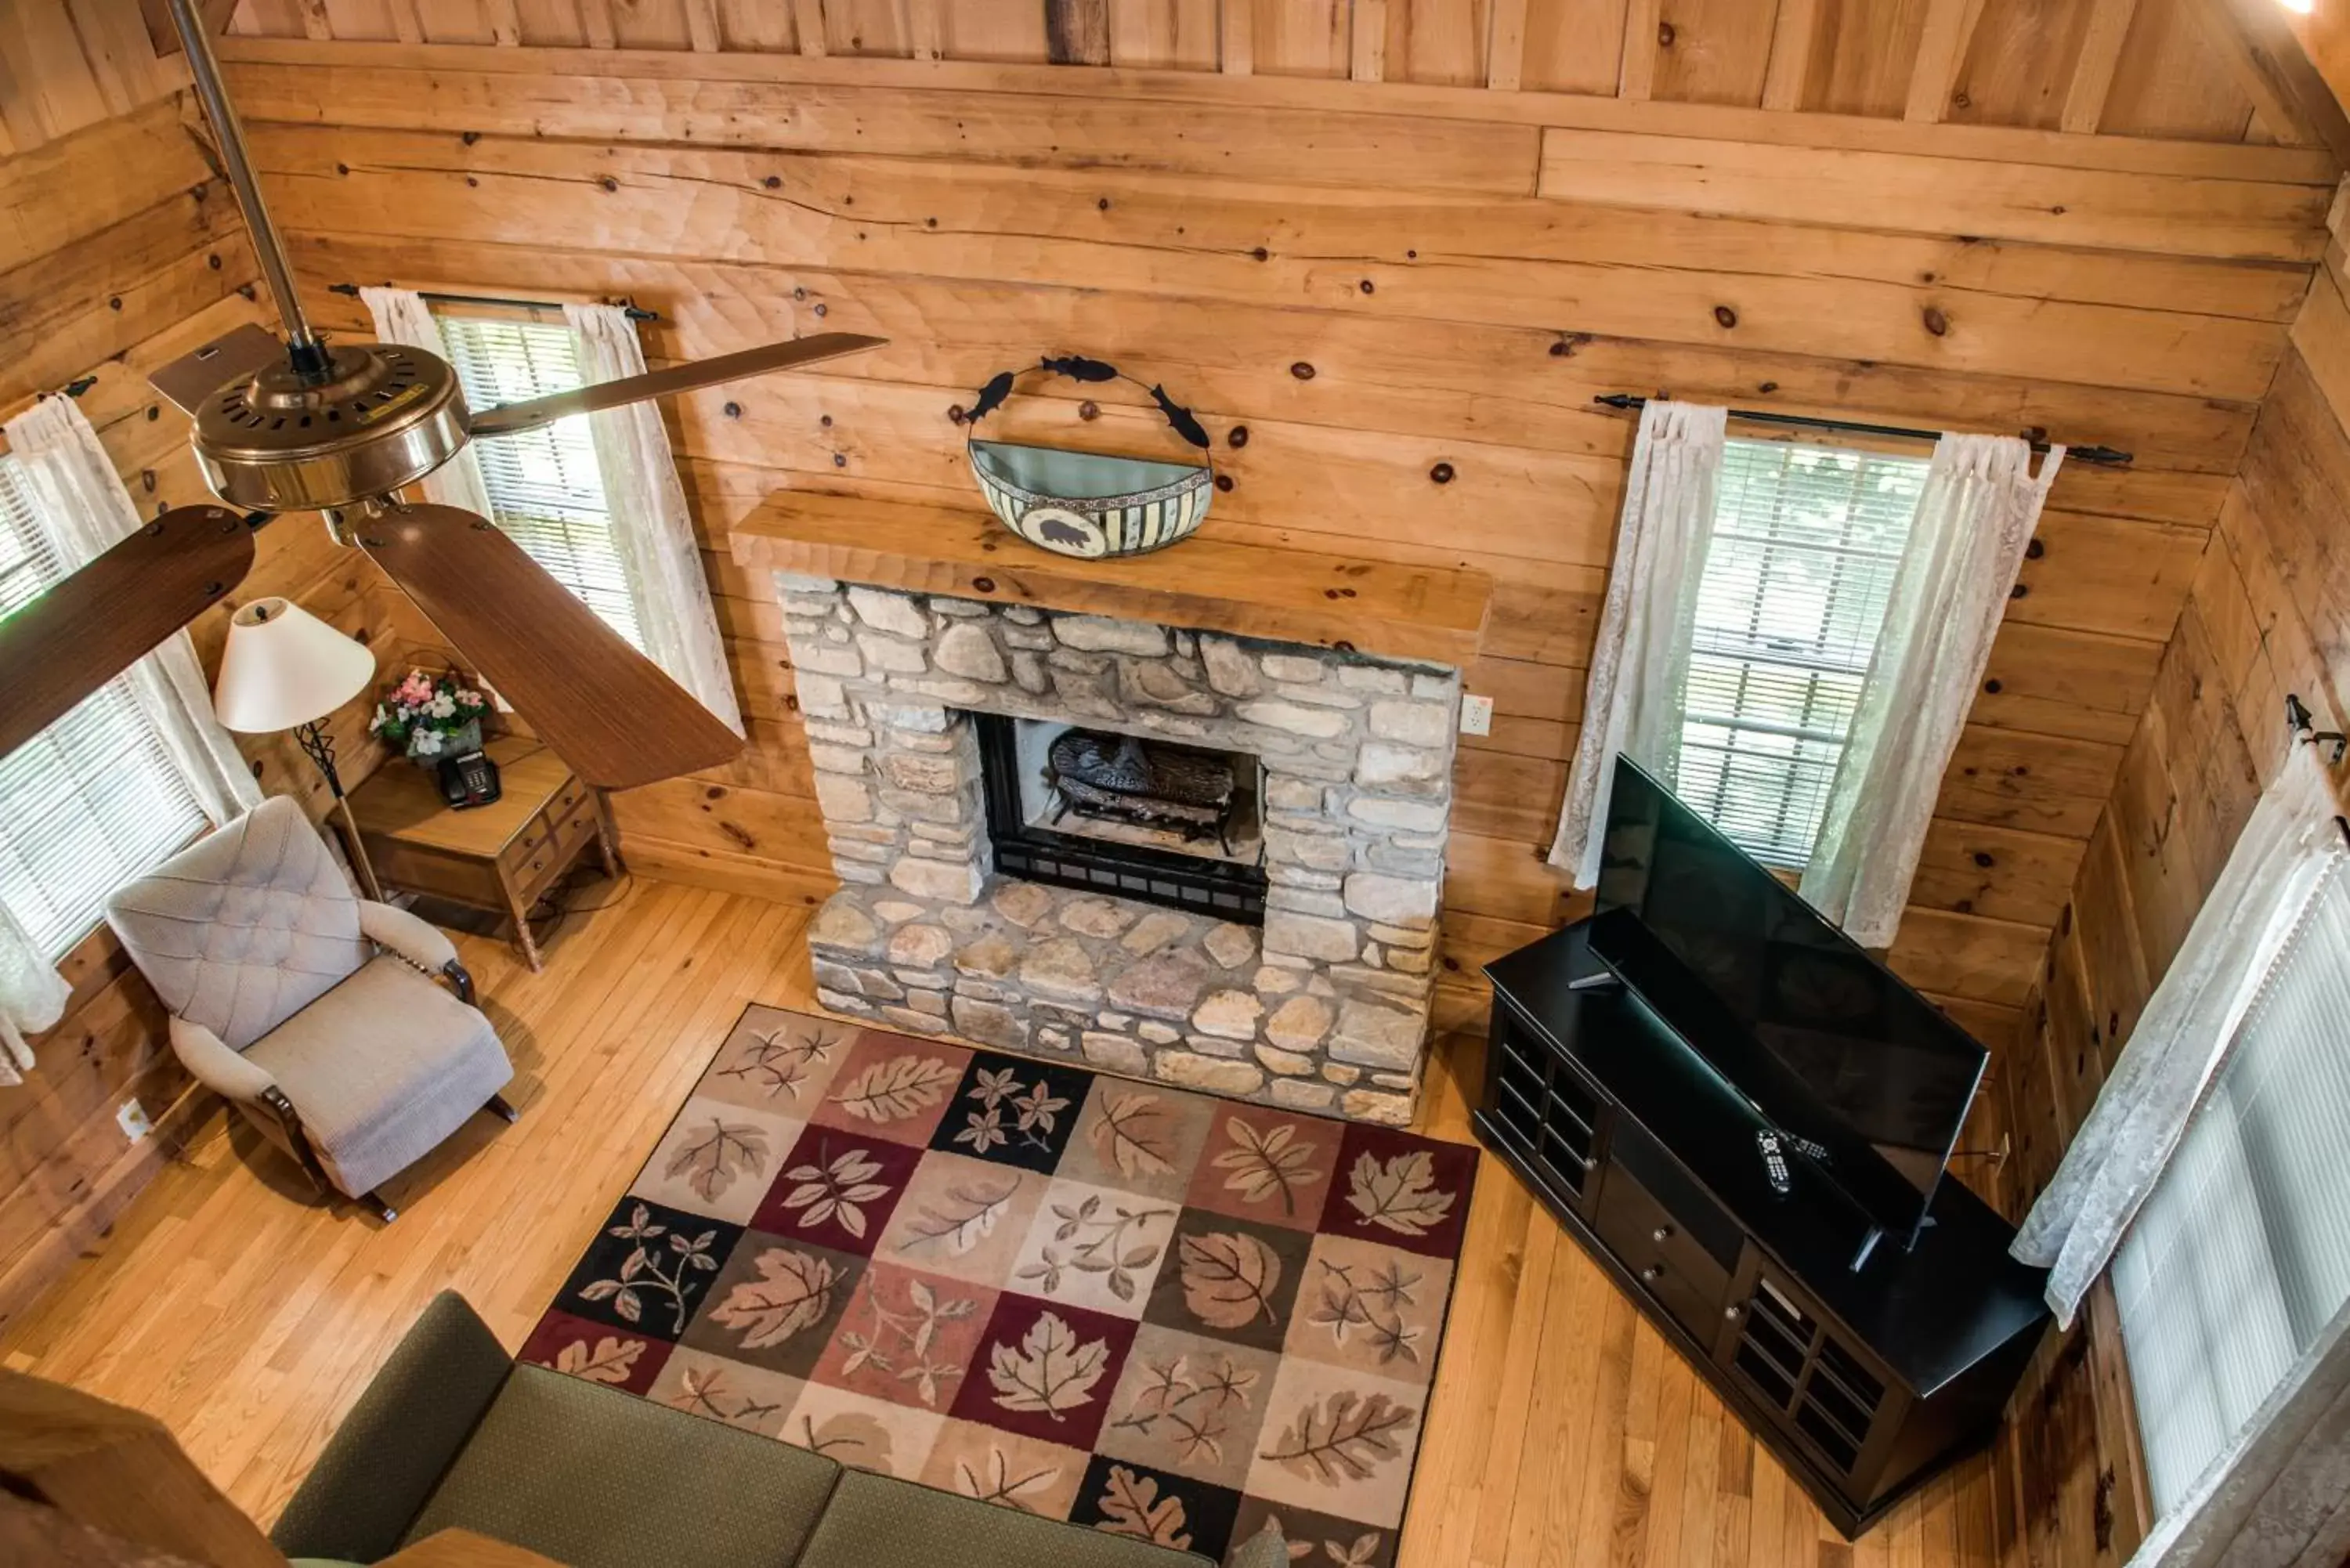 TV/Entertainment Center in Boxwood Lodge Blowing Rock near Boone-University